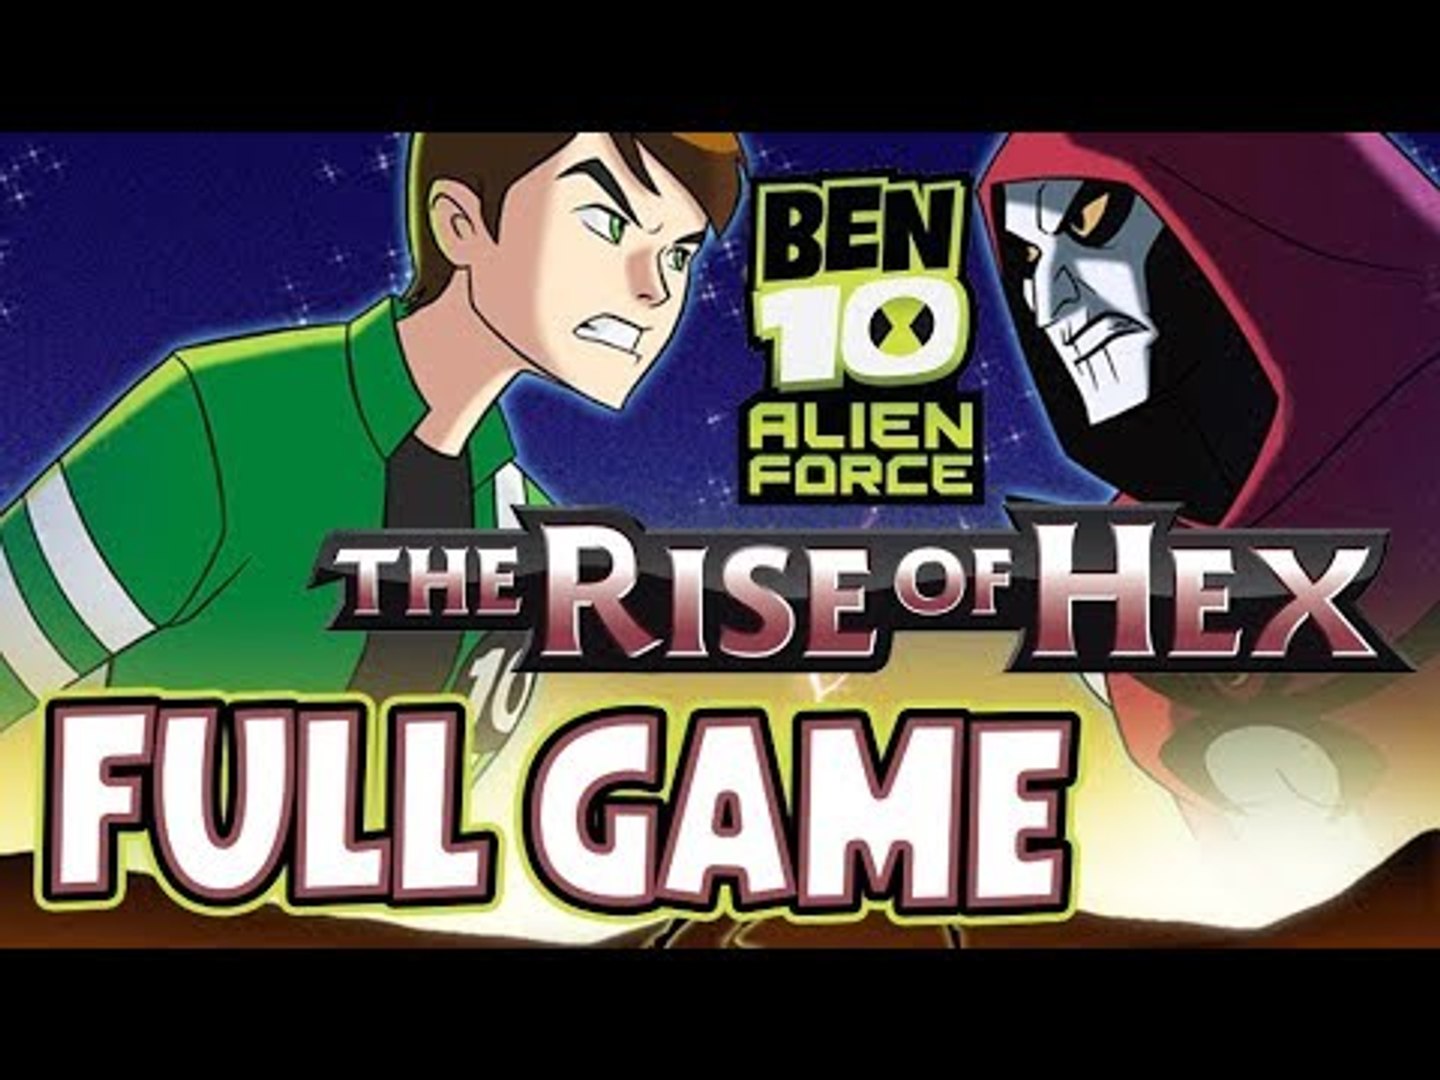 Ben 10: The Rise of Hex FULL GAME Movie Longplay (Wii, X360) - video  Dailymotion